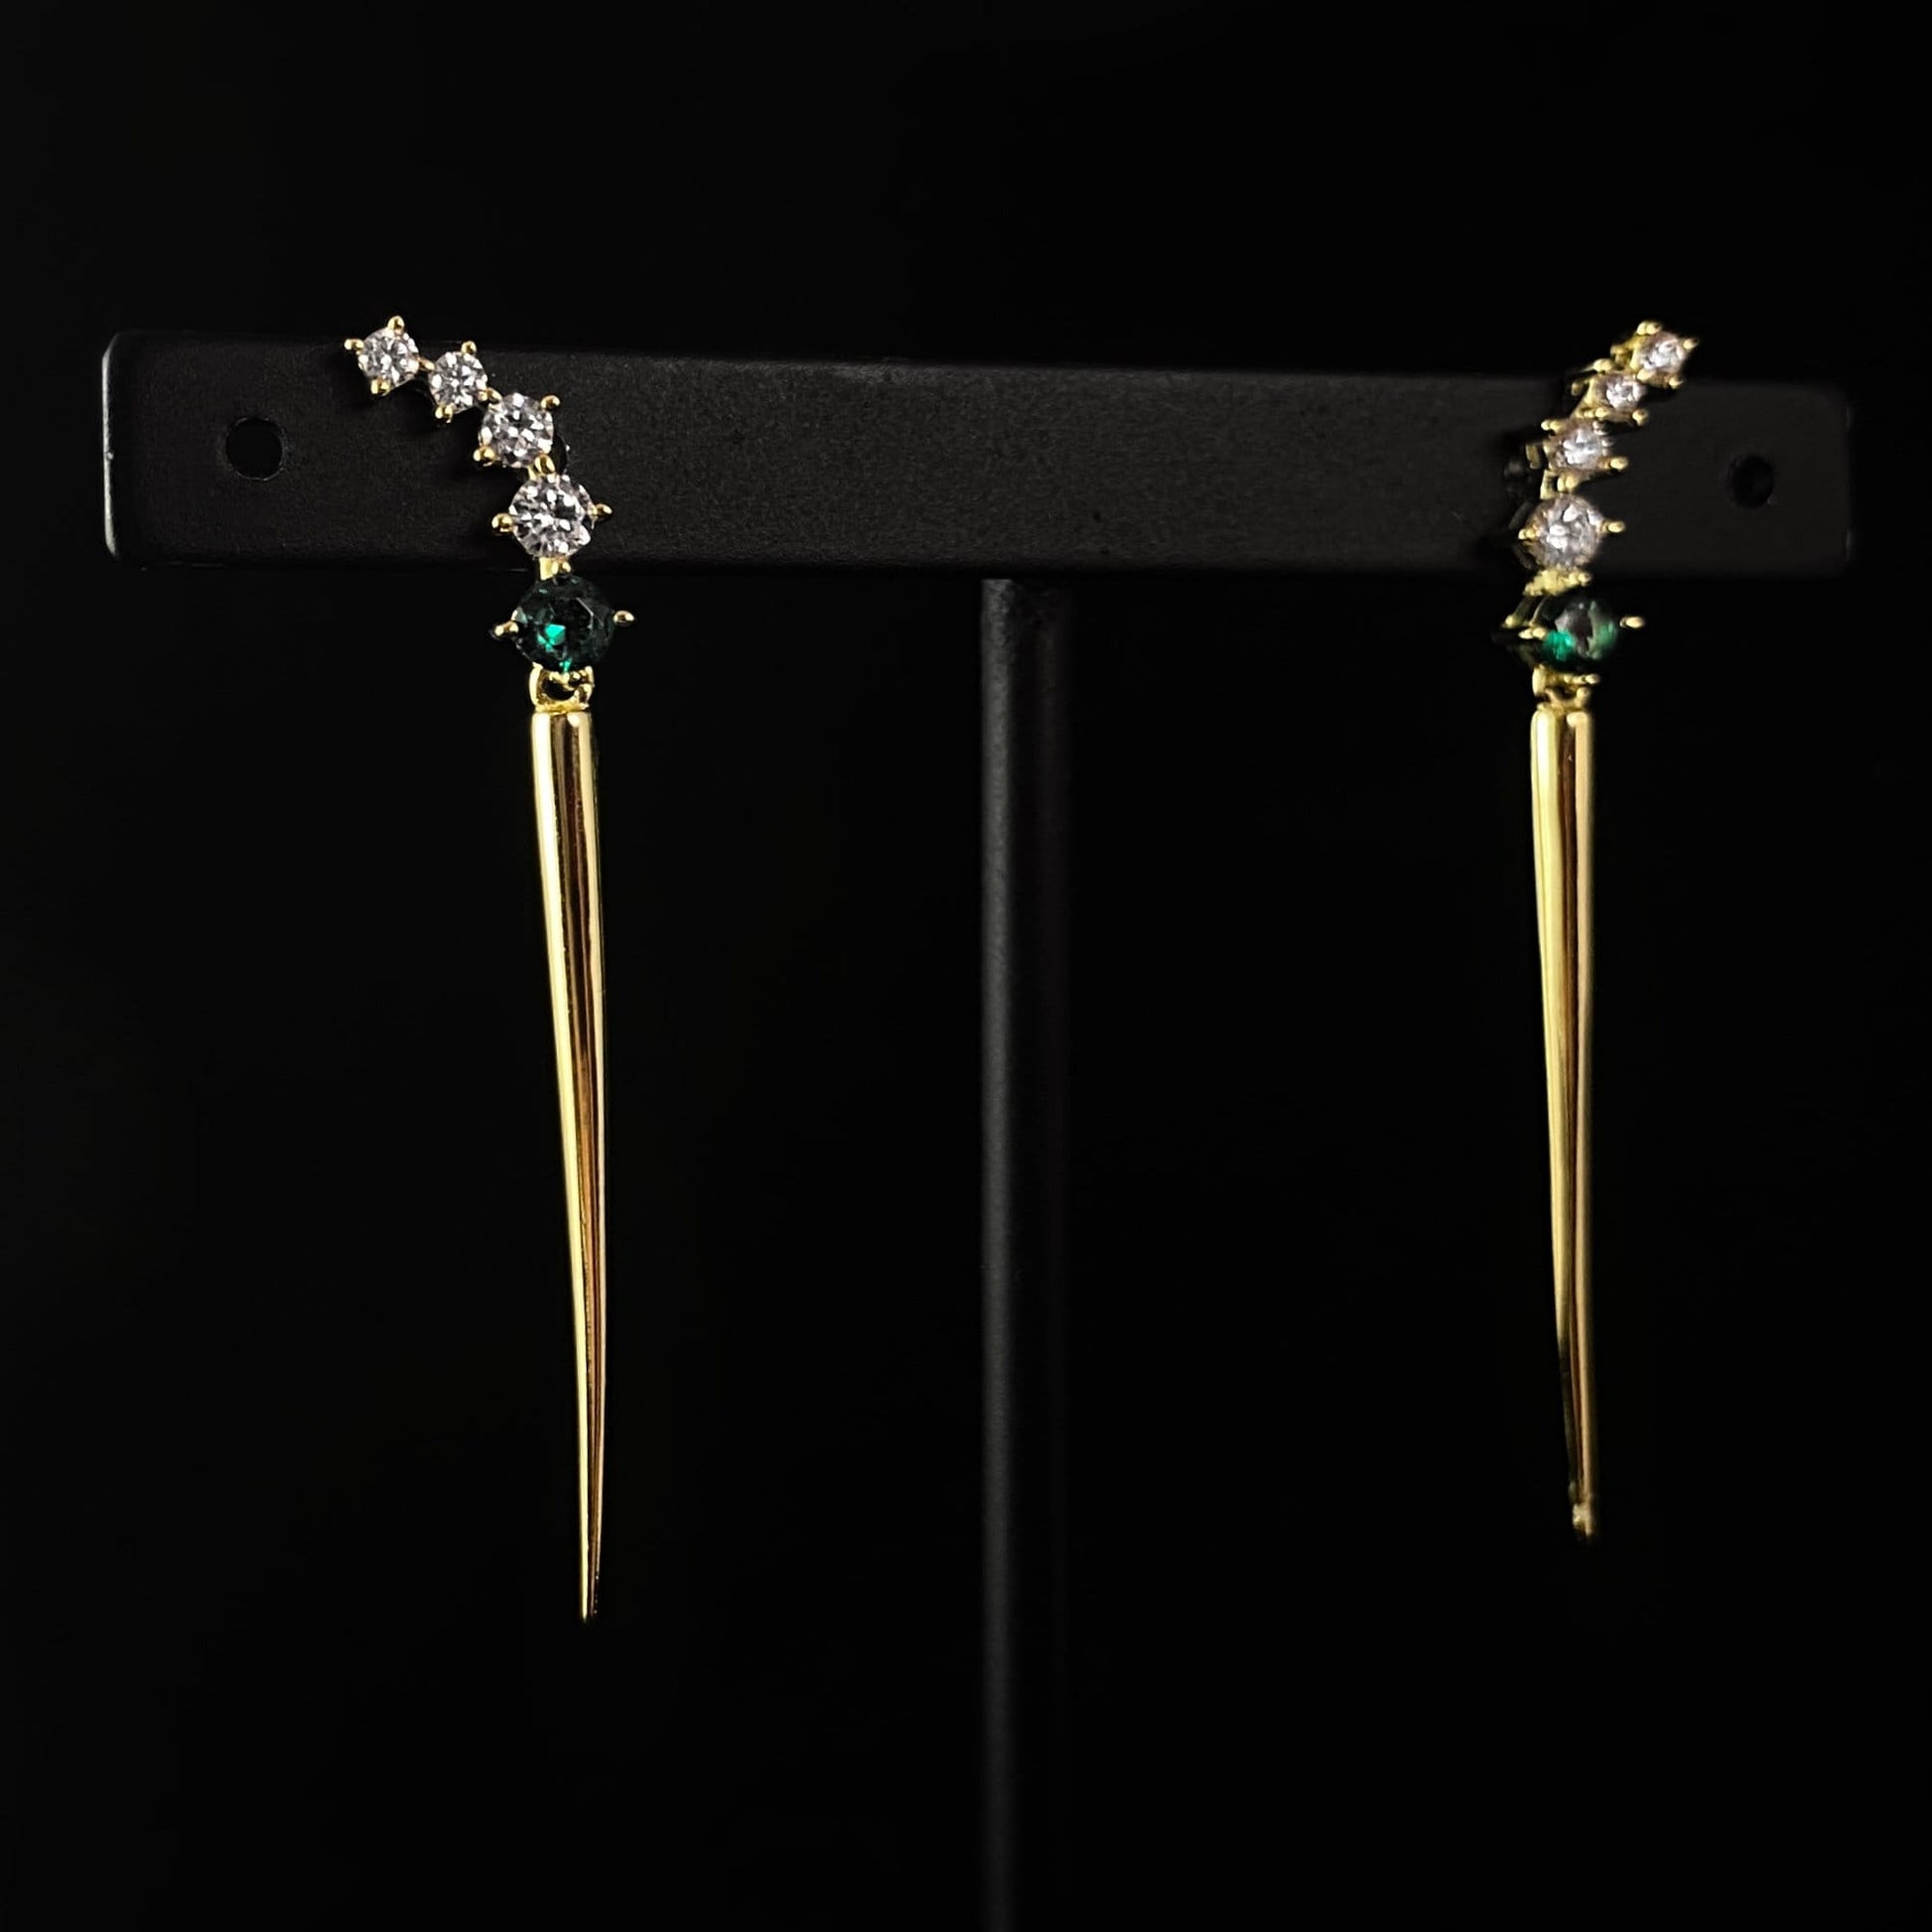 Elegant Gold Spike Earrings with Round Green and Clear Crystal Accents - Genevive